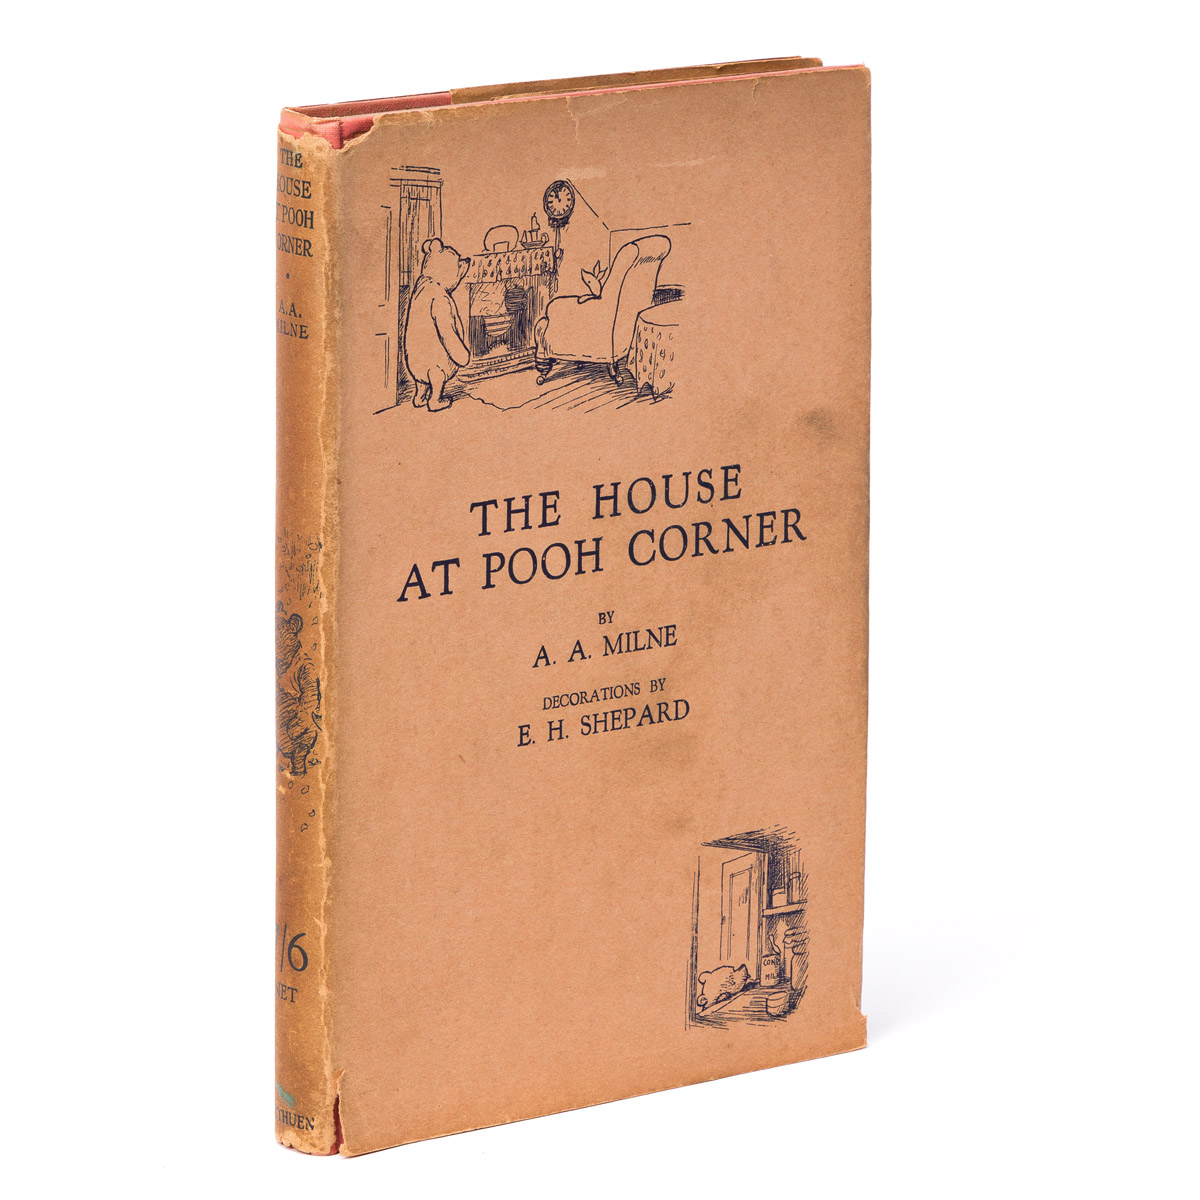 (CHILDRENS LITERATURE.) Milne, A.A. The House At Pooh Corner.